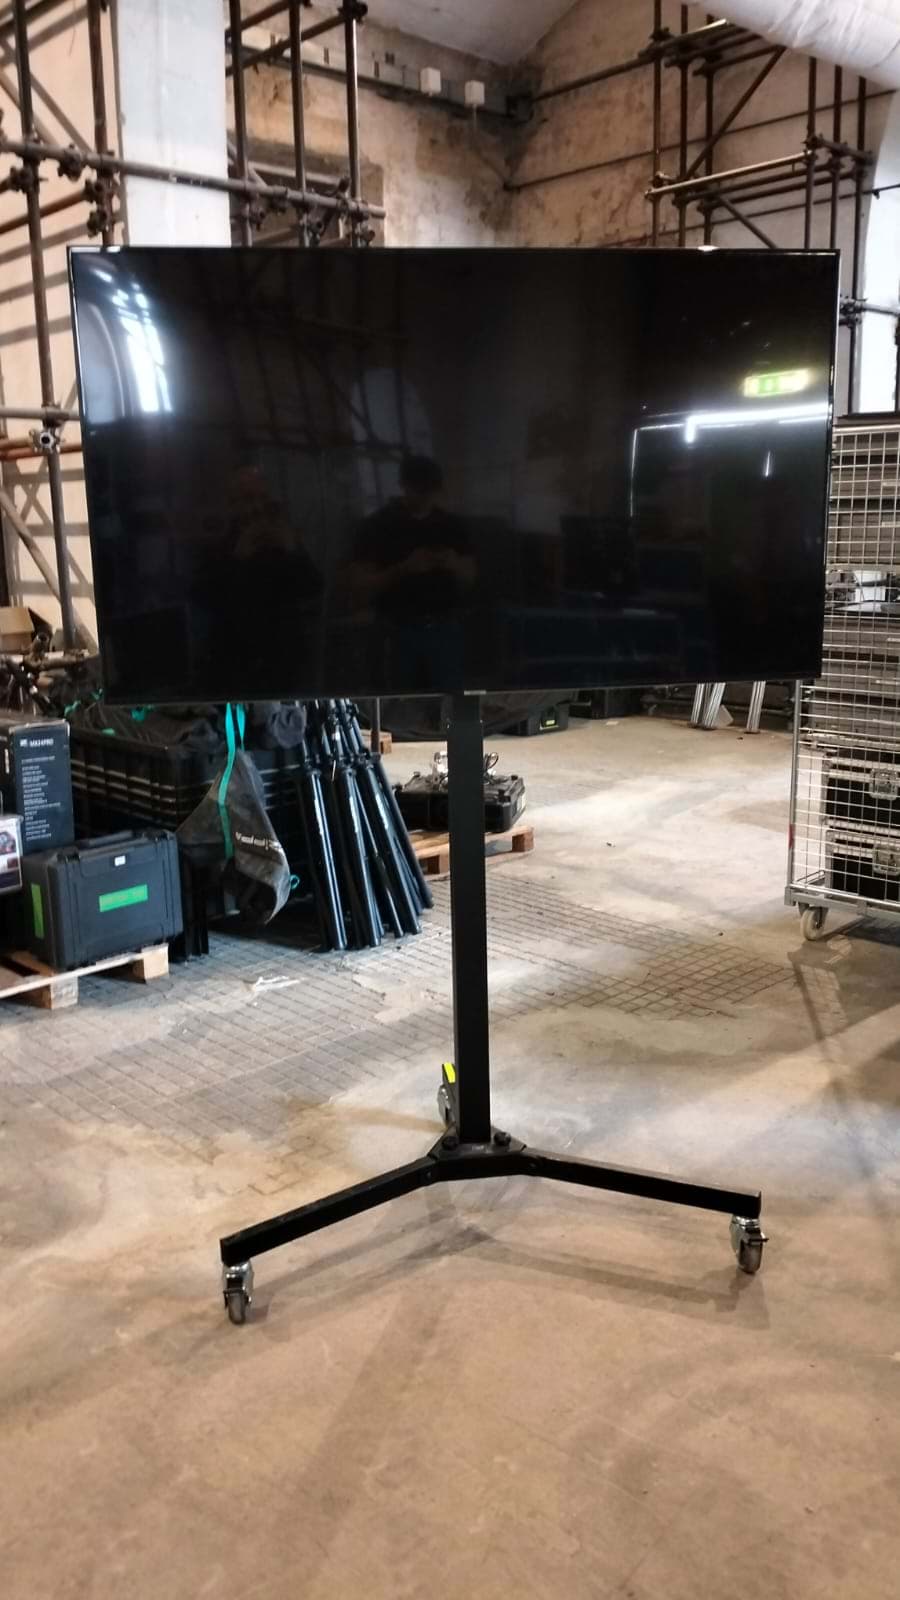 Picture of Self-standing 48" Plasma TV / monitor